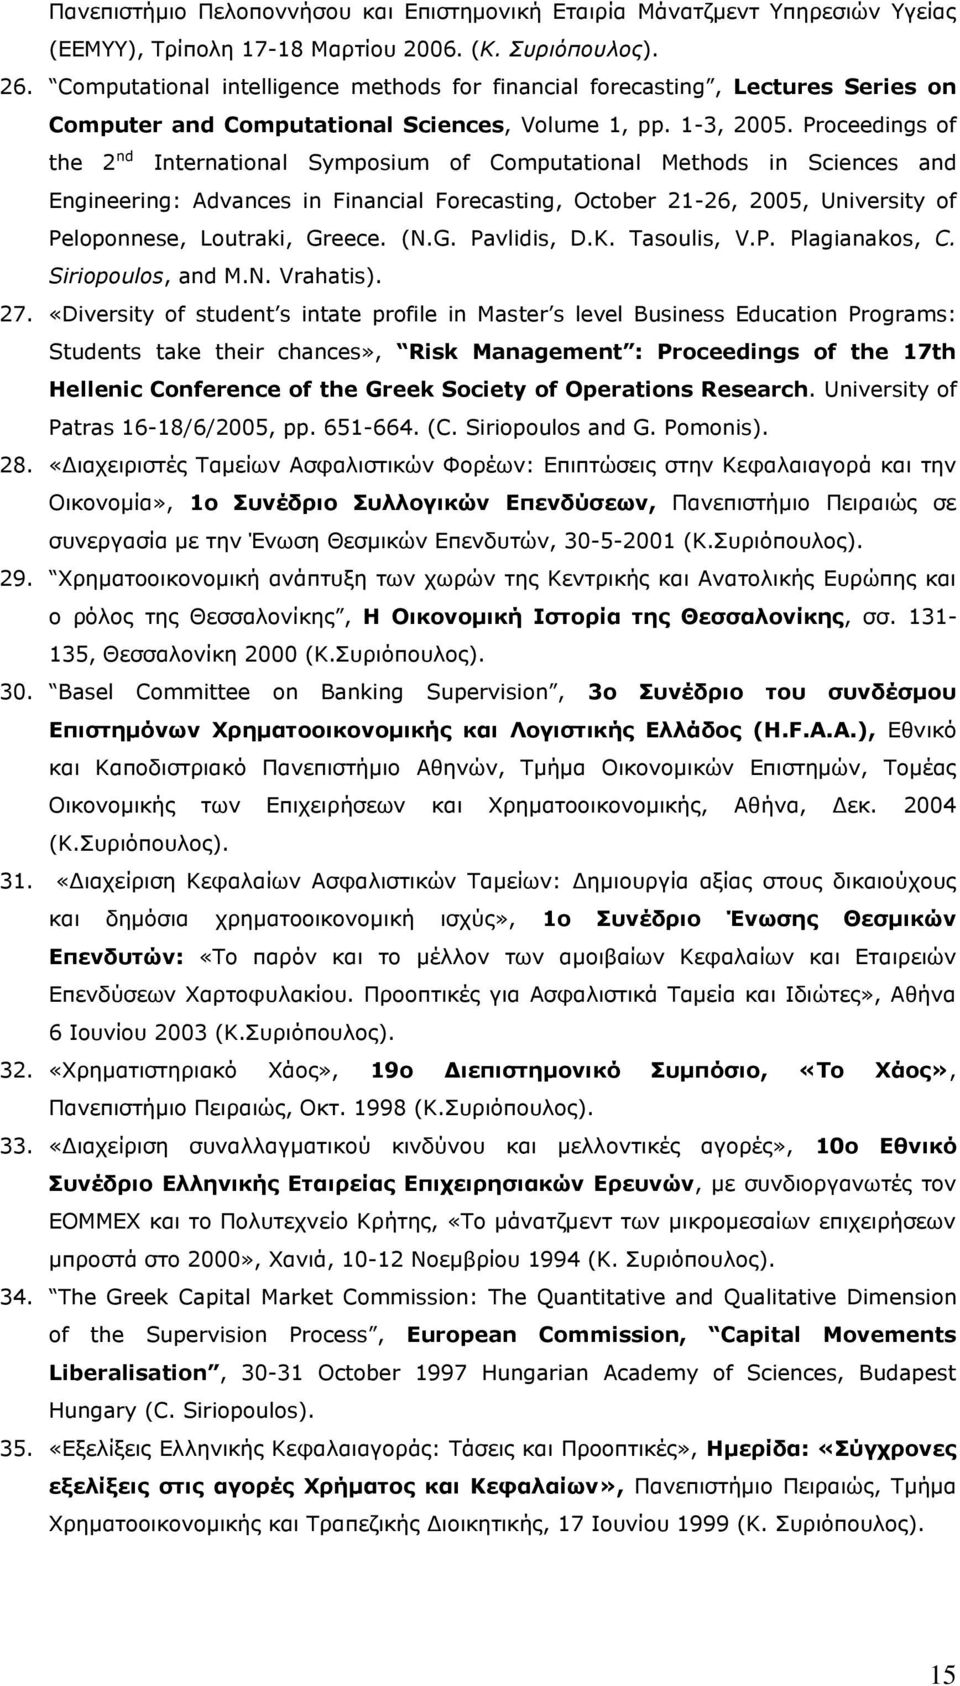 Proceedings of the 2 nd International Symposium of Computational Methods in Sciences and Engineering: Advances in Financial Forecasting, October 21-26, 2005, University of Peloponnese, Loutraki,